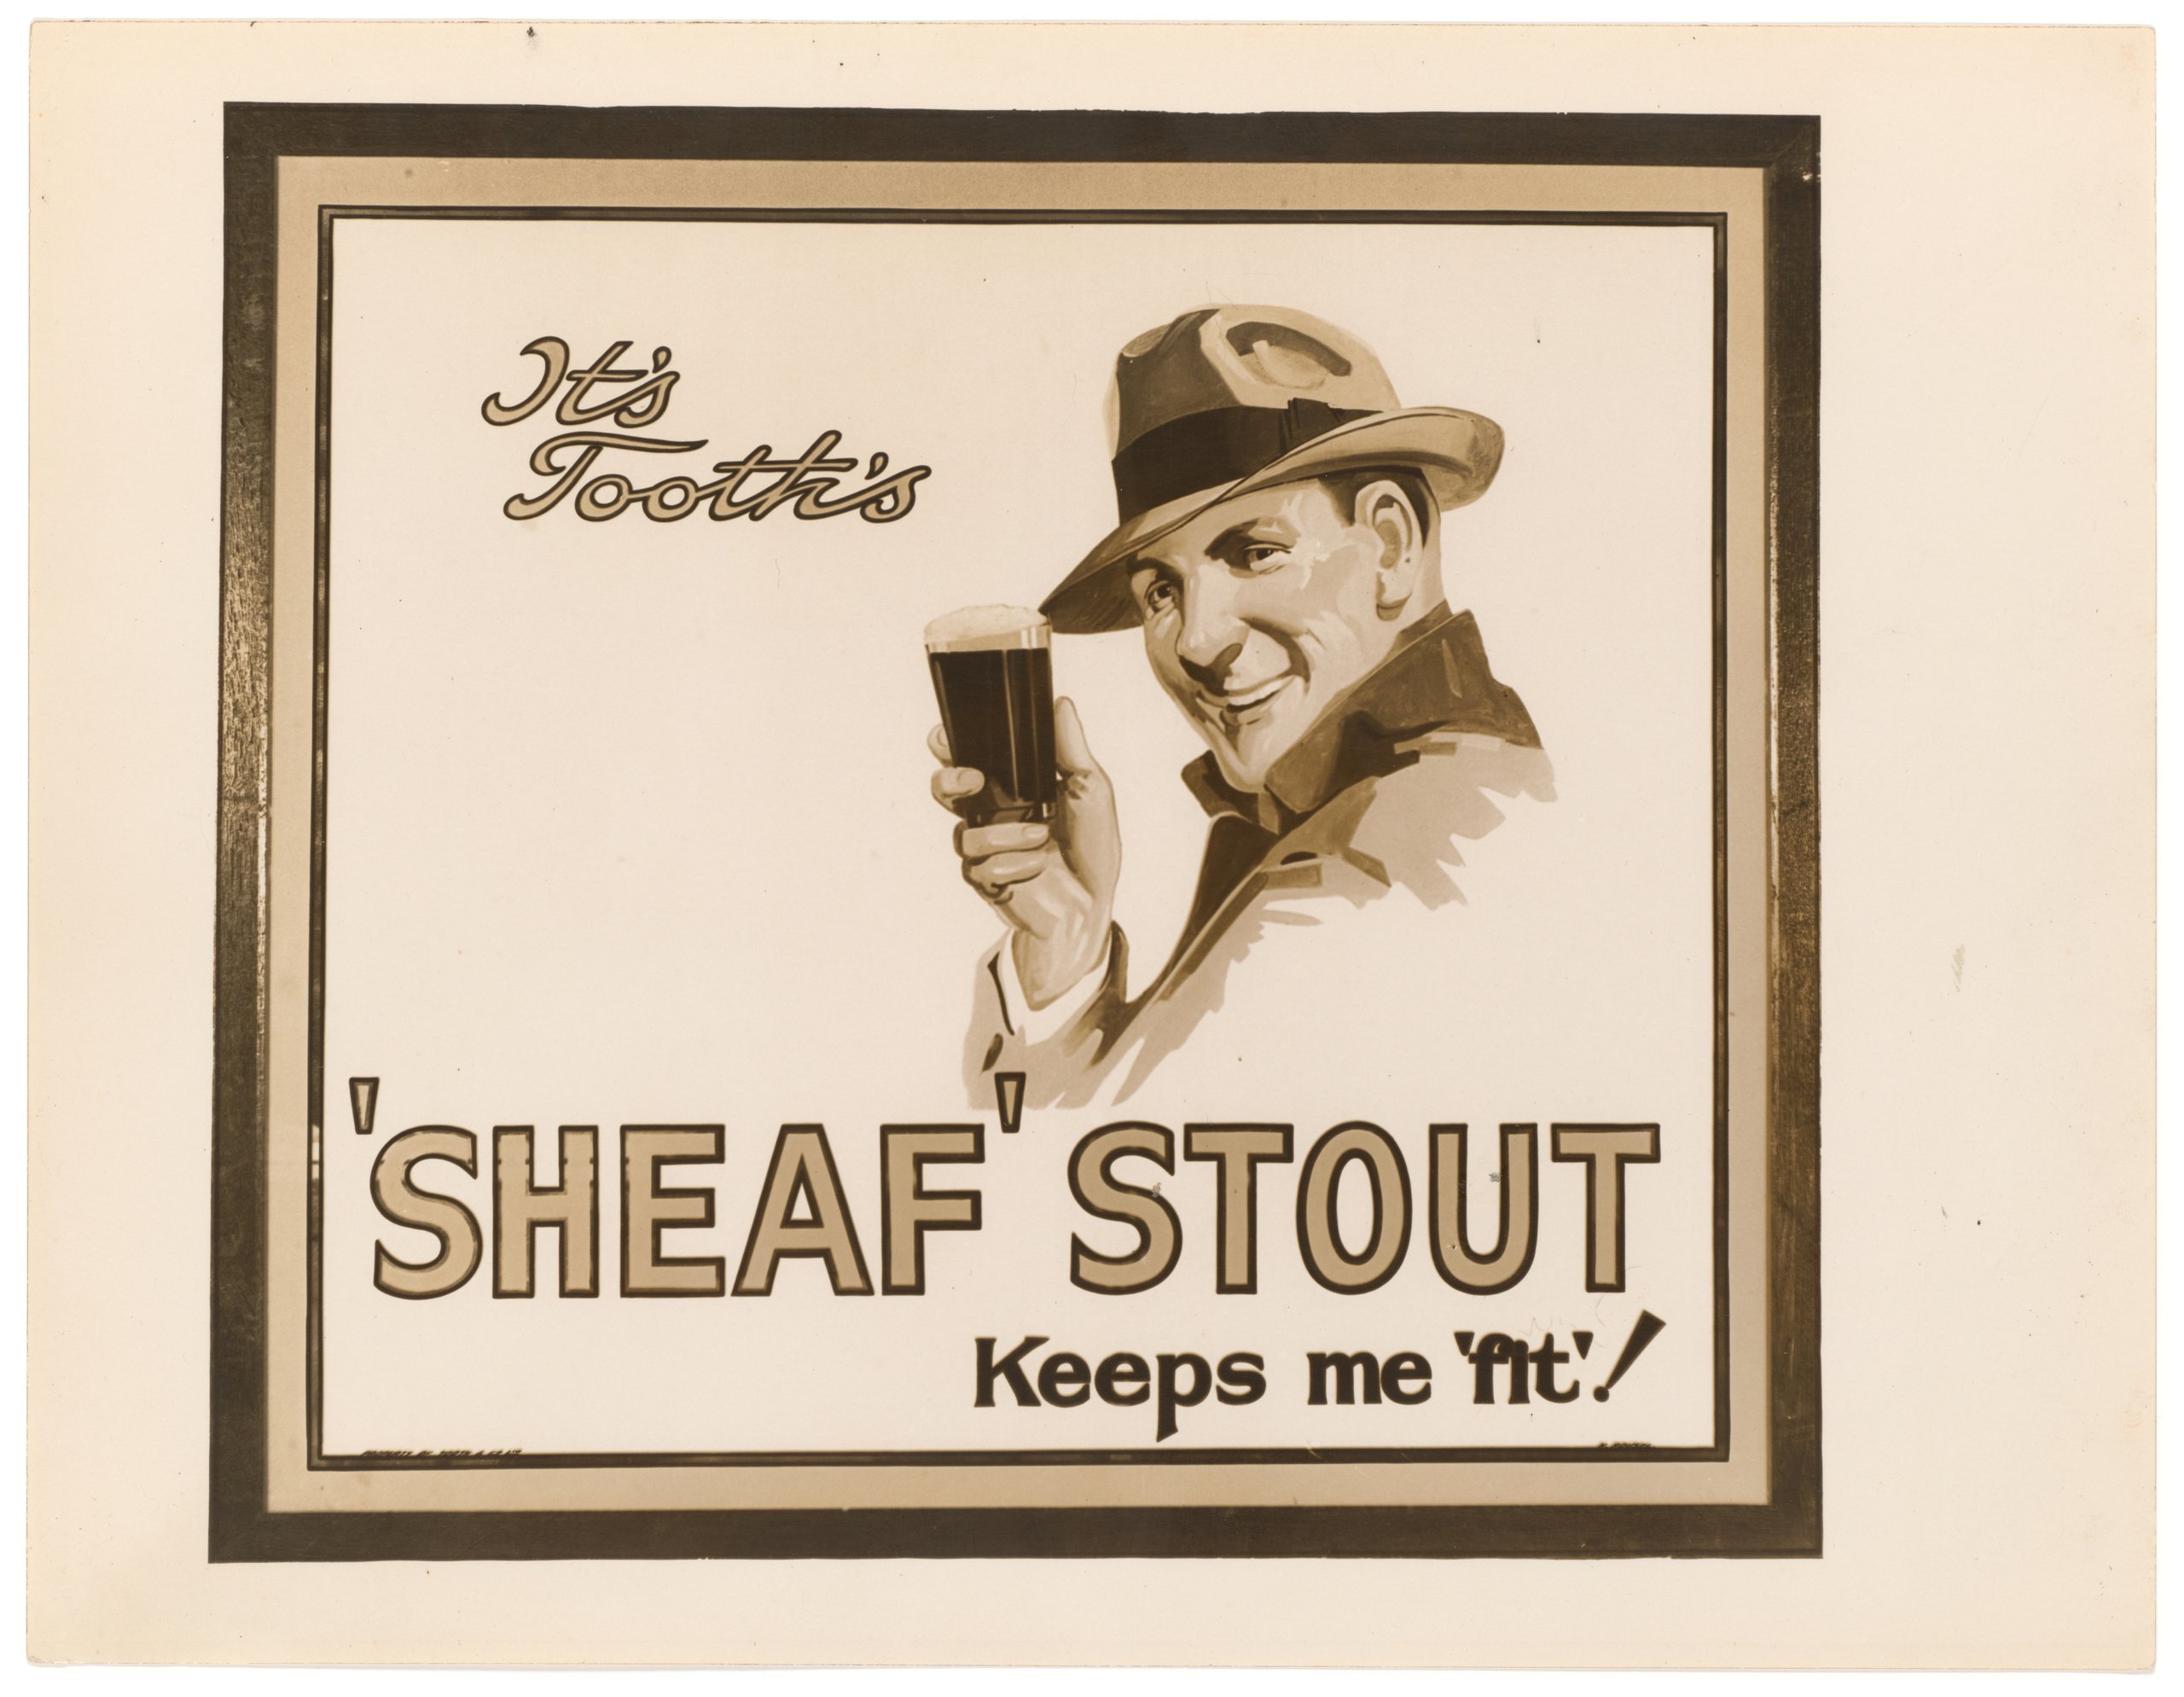 Photograph of advertising poster for Tooth's Sheaf Stout